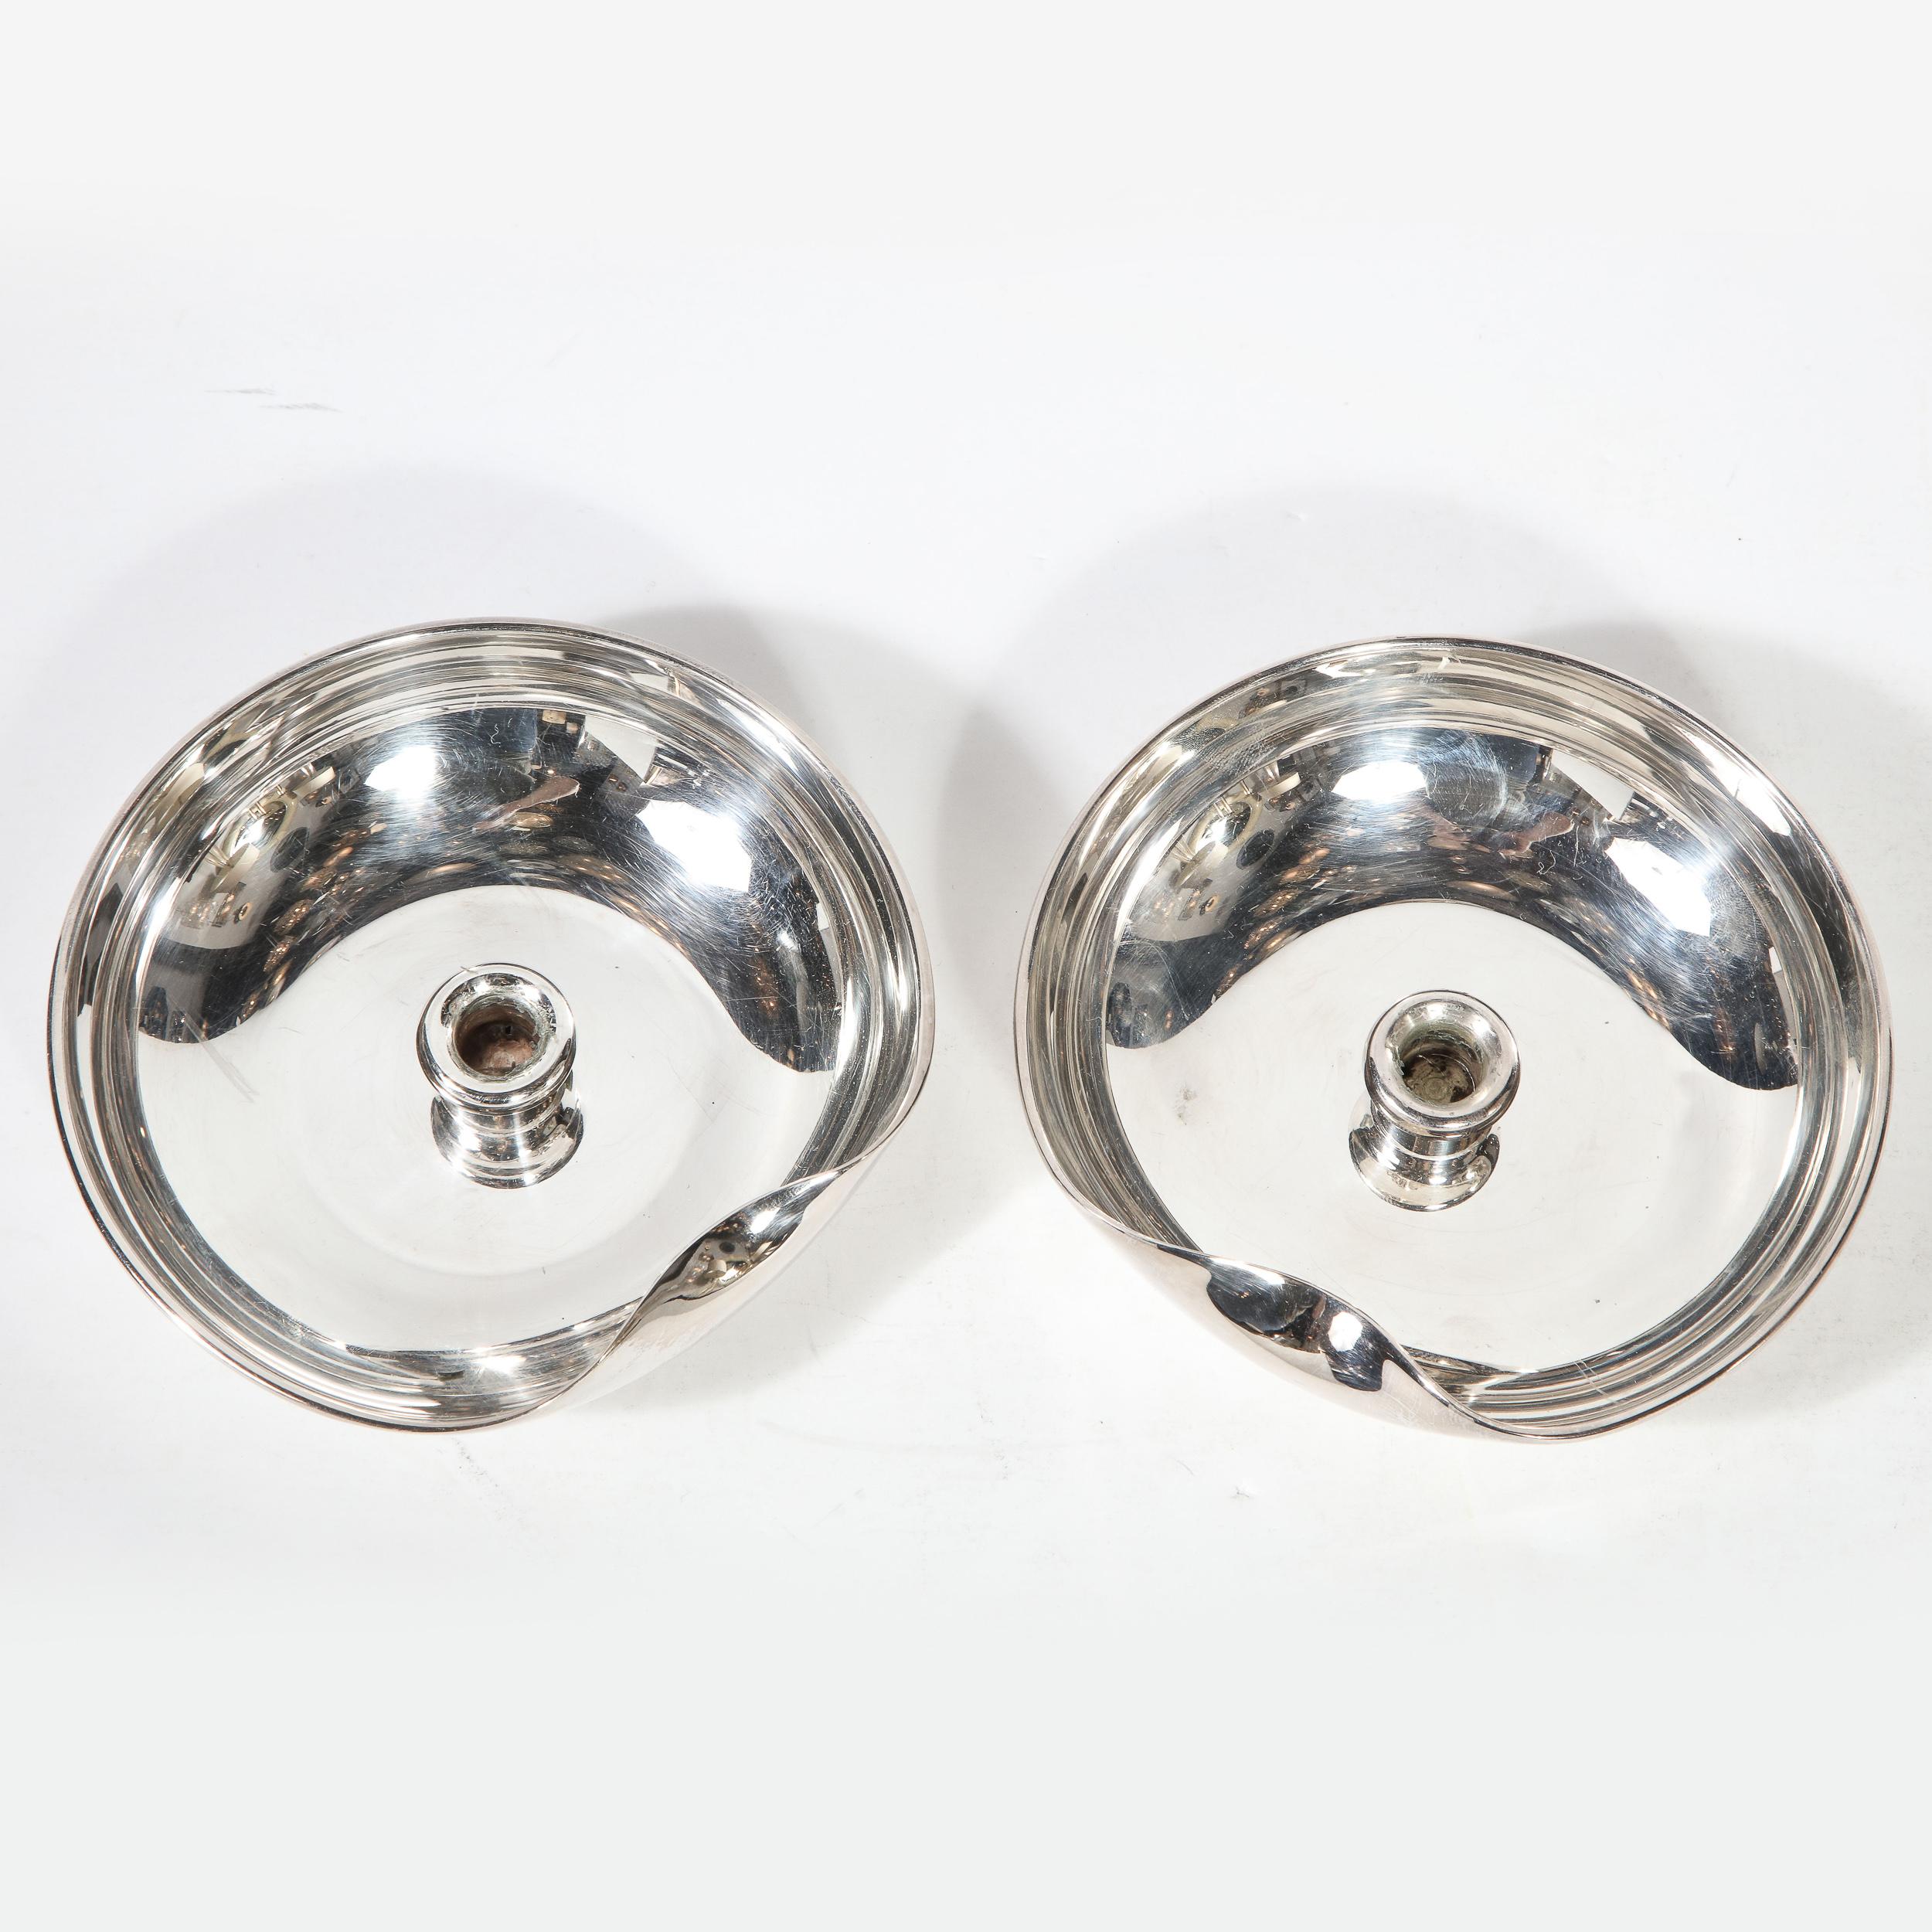 Pair of Modernist Sterling Candle Holders by Elsa Peretti for Tiffany & Co. For Sale 1